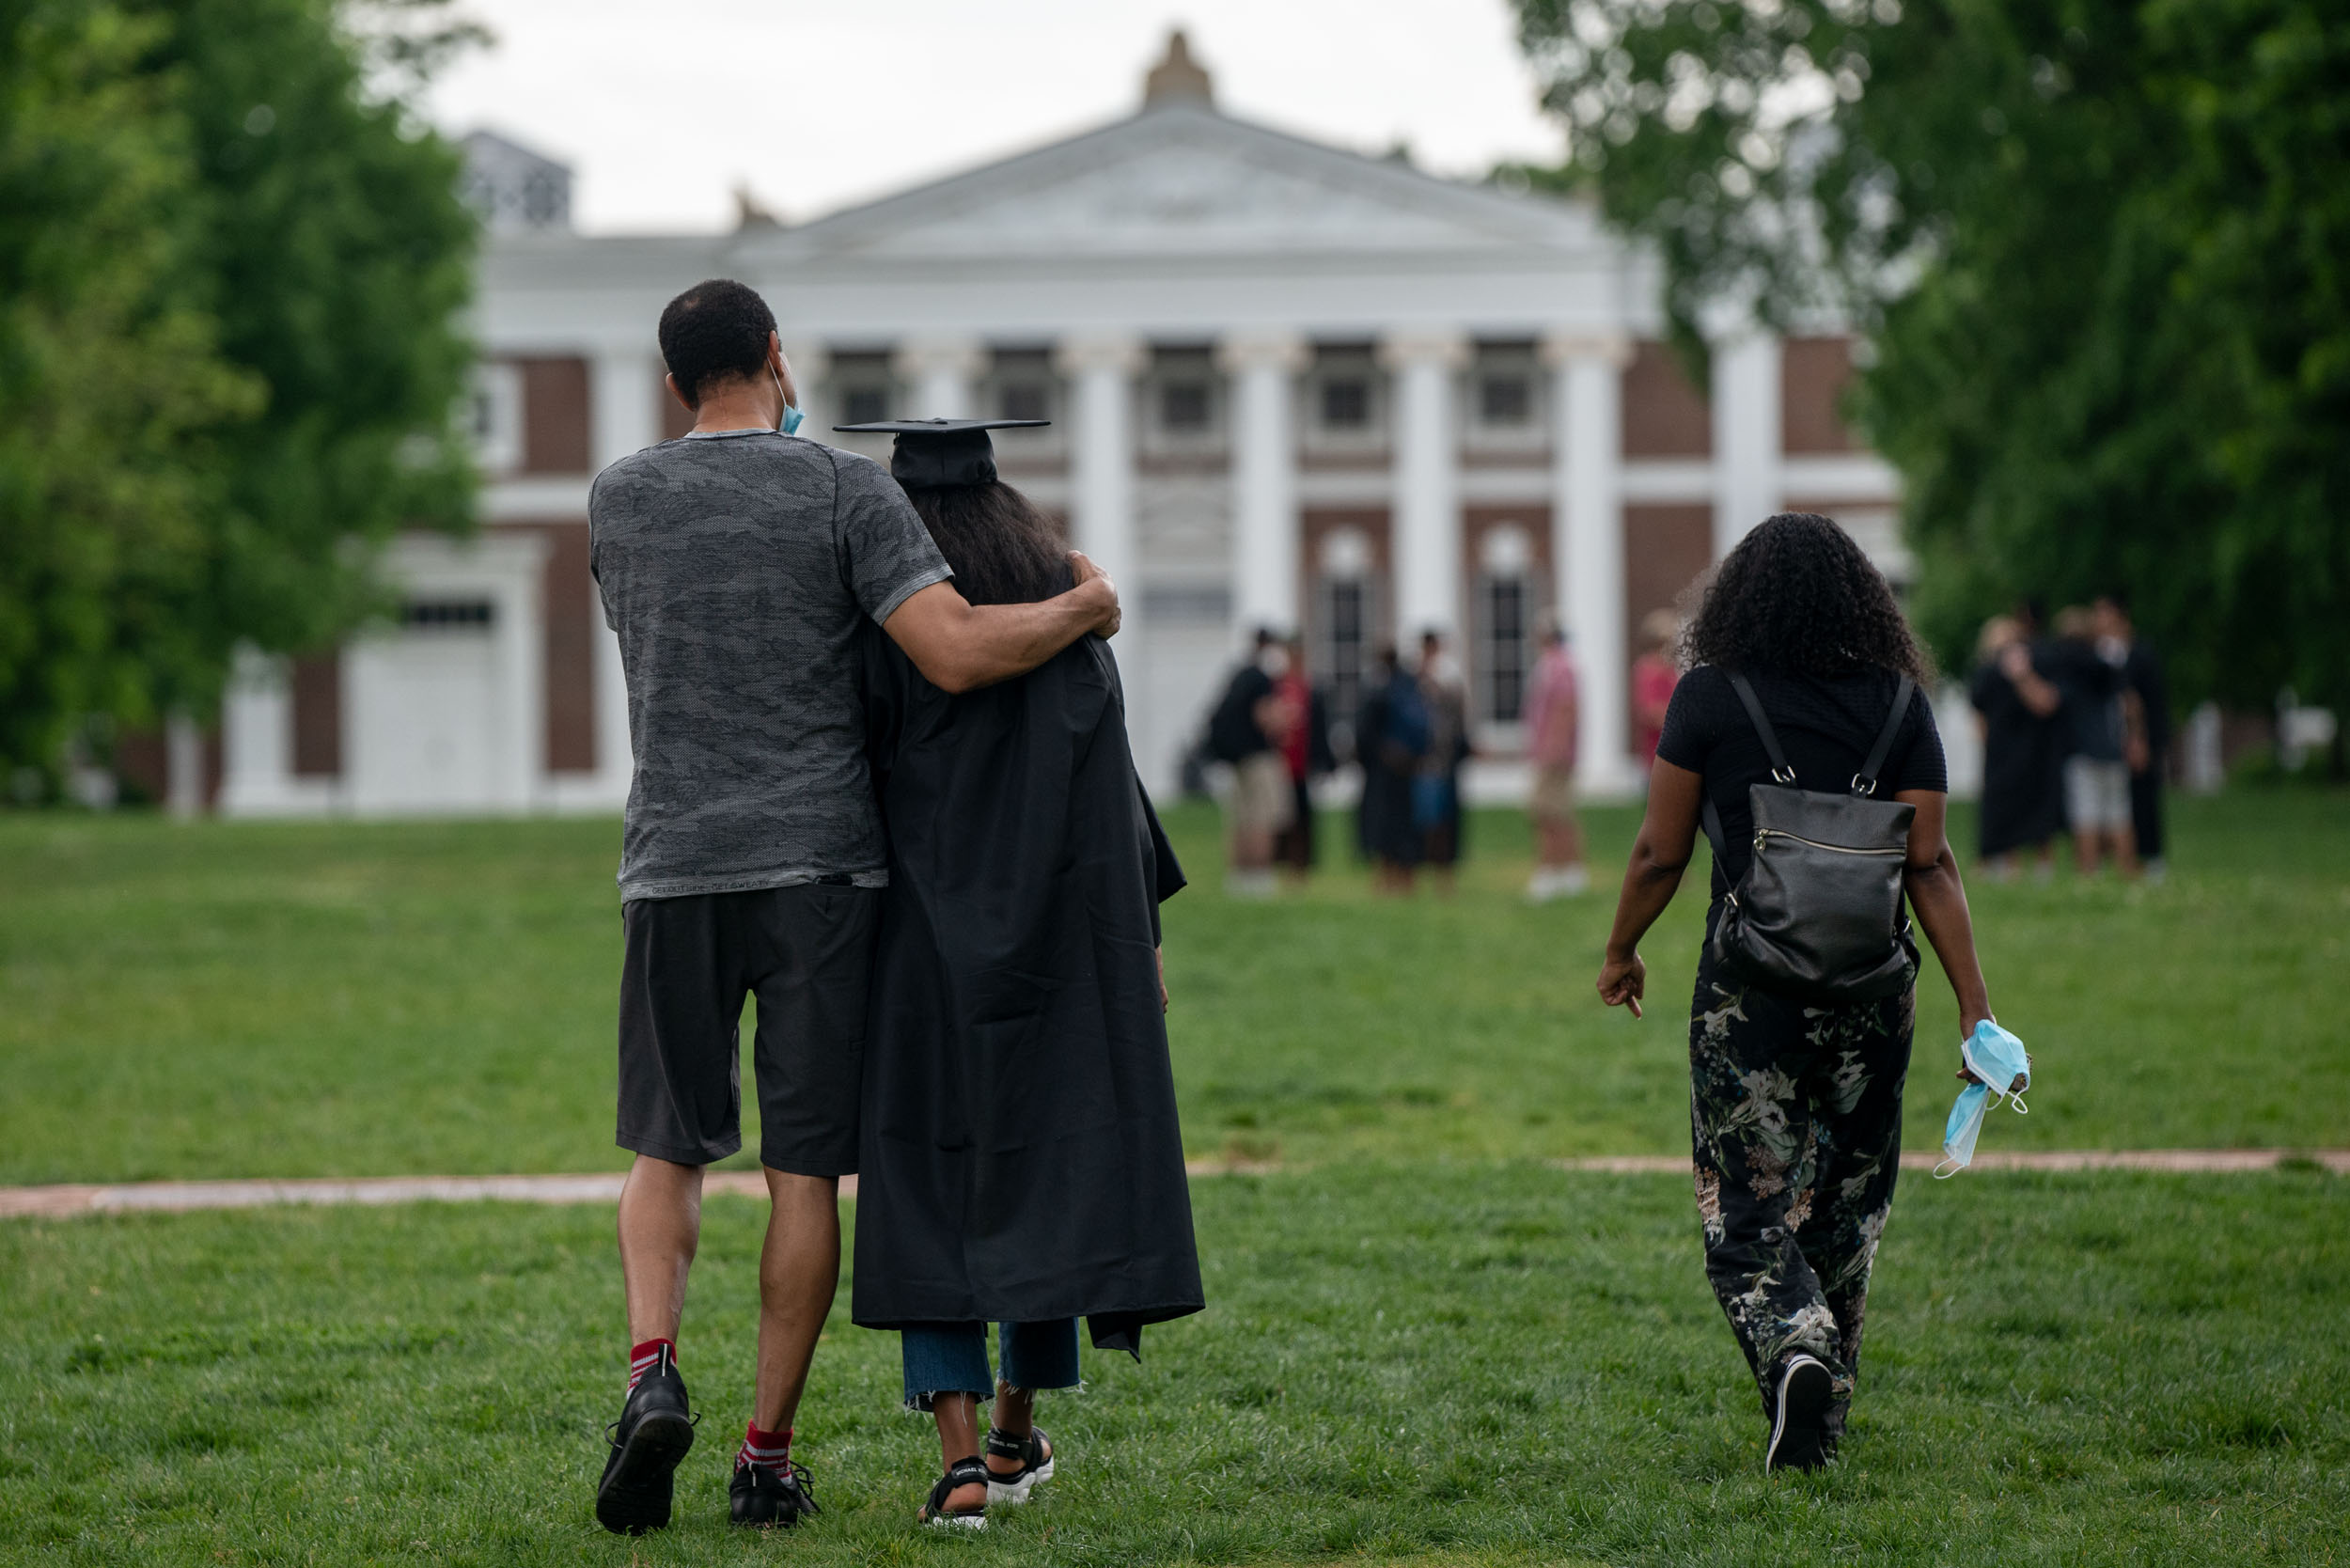 Graduate is hugged by a family member as they walk on grounds together